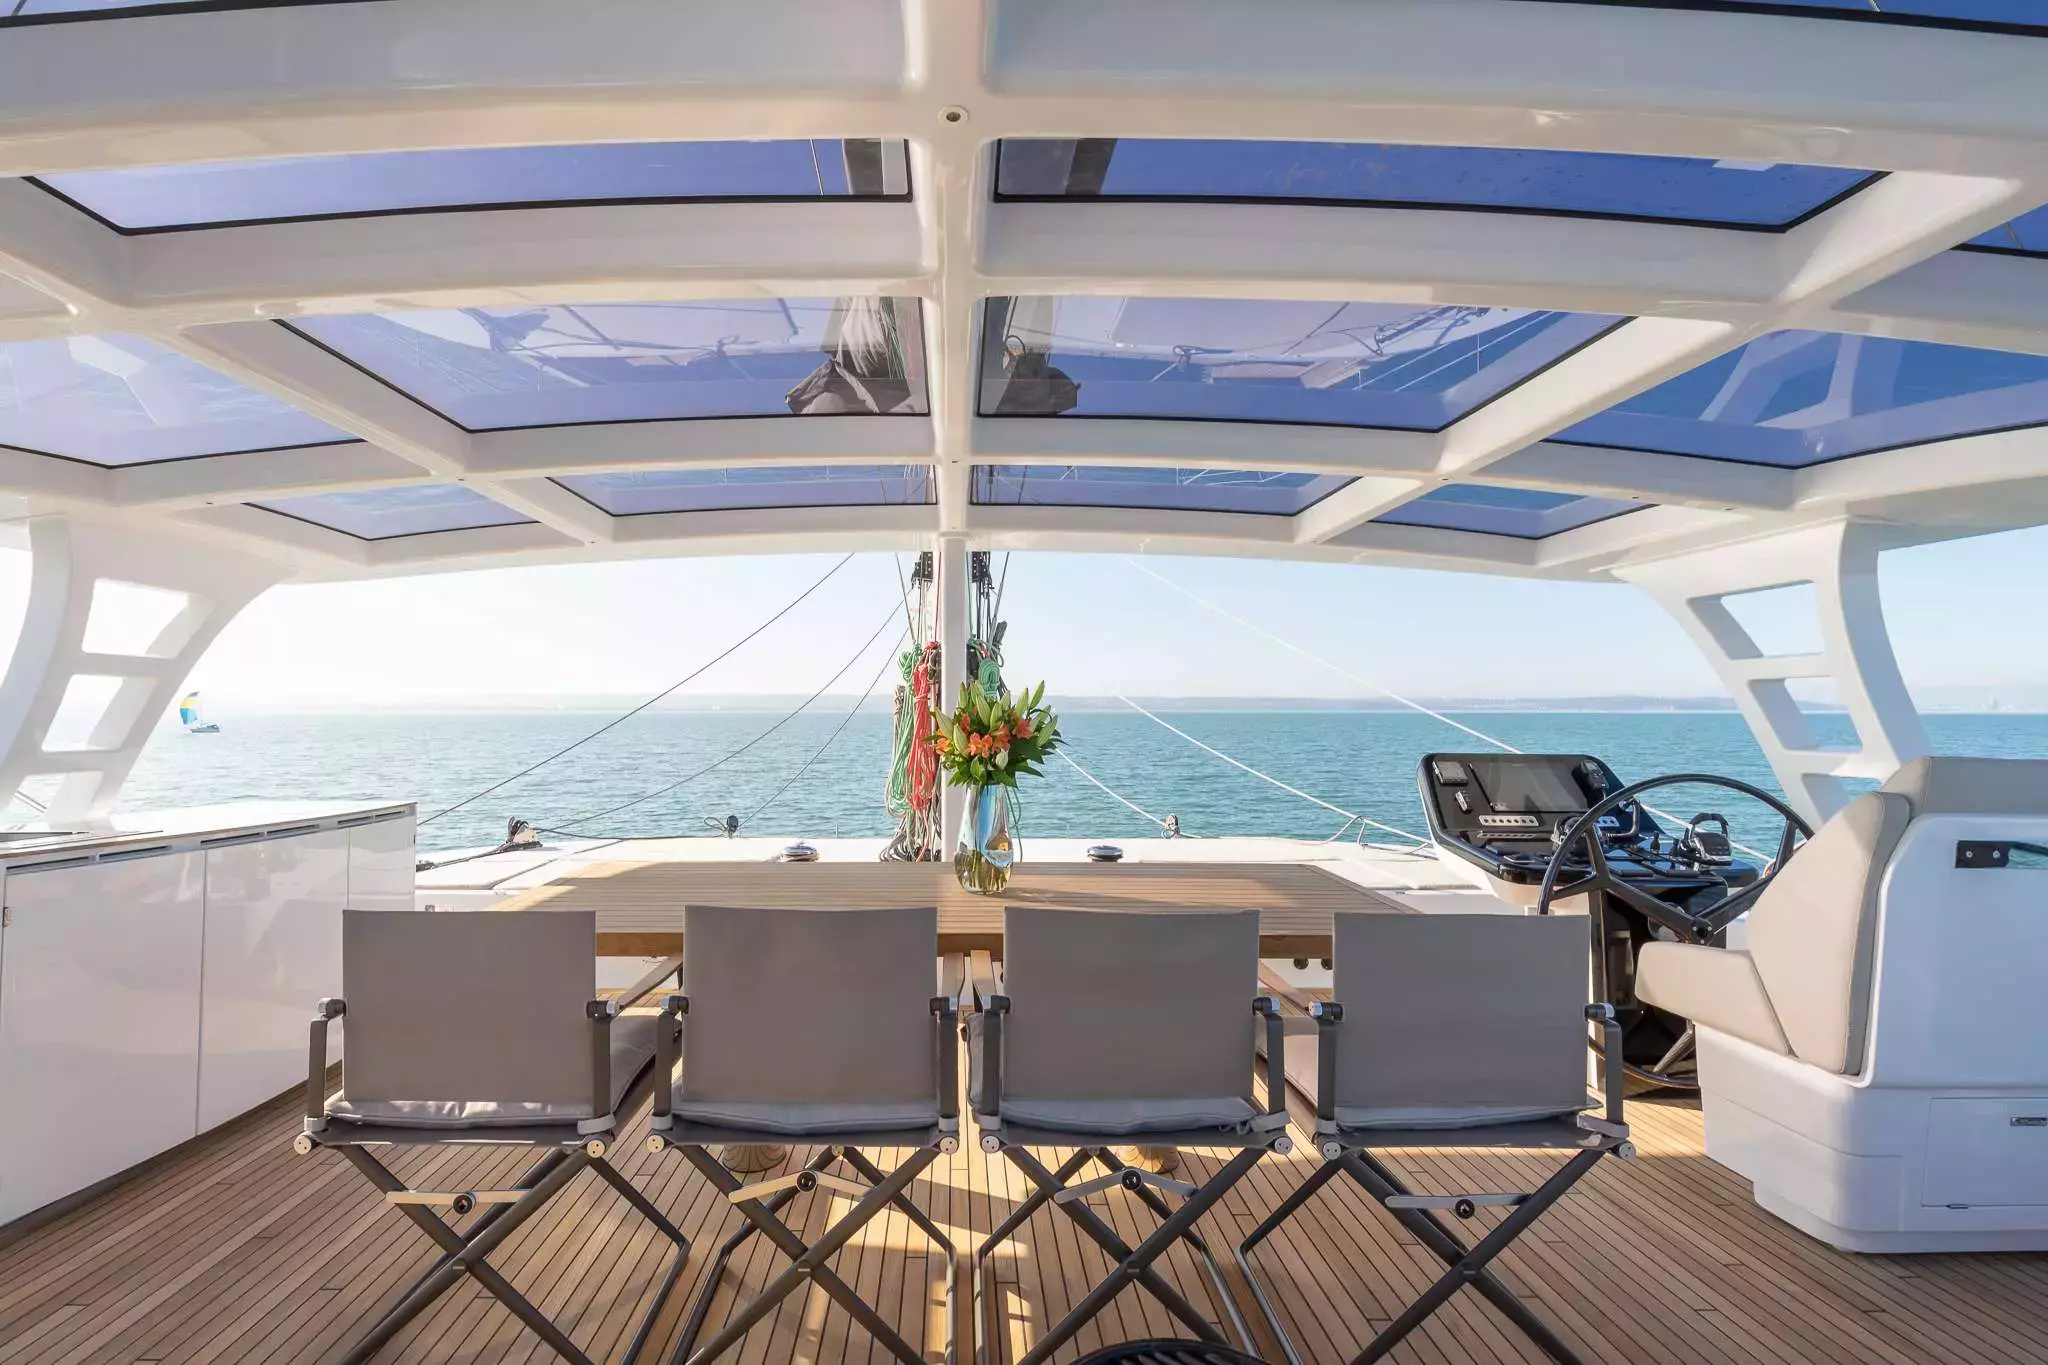 Ylime by Sunreef Yachts - Top rates for a Rental of a private Luxury Catamaran in Italy